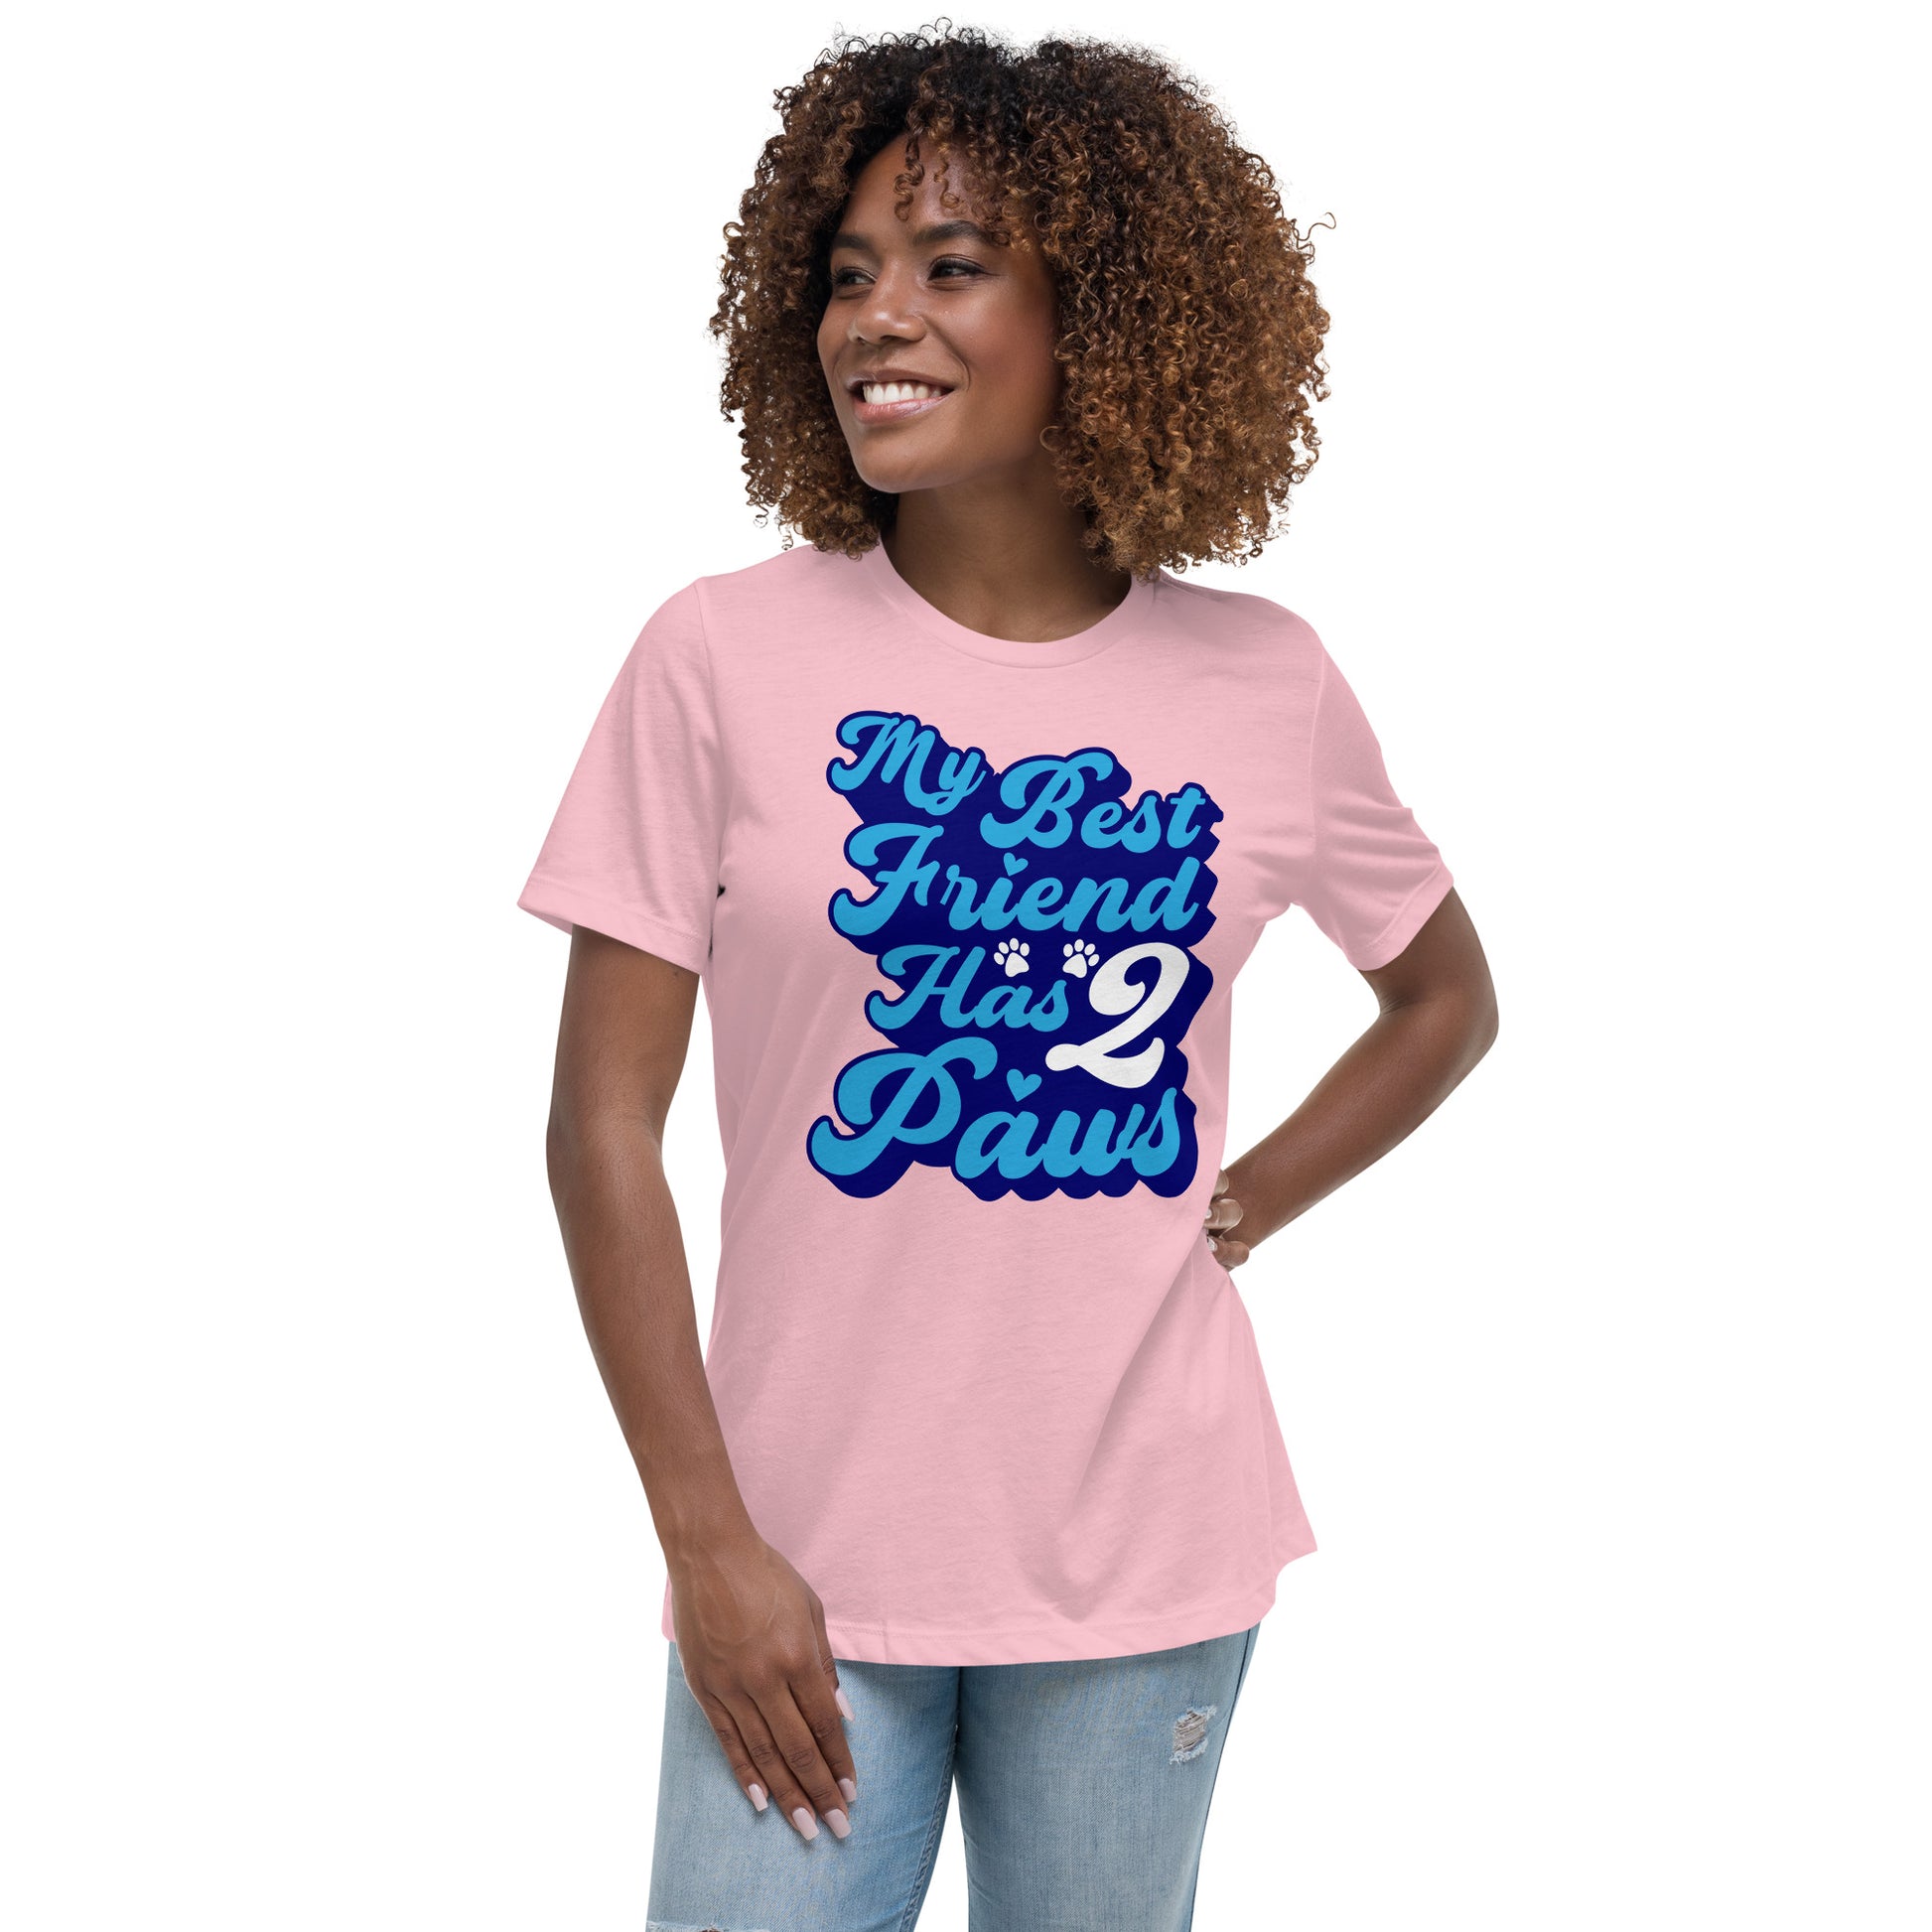 My best friend has 2 Paws women’s relaxed fit t-shirts by Dog Artistry pink